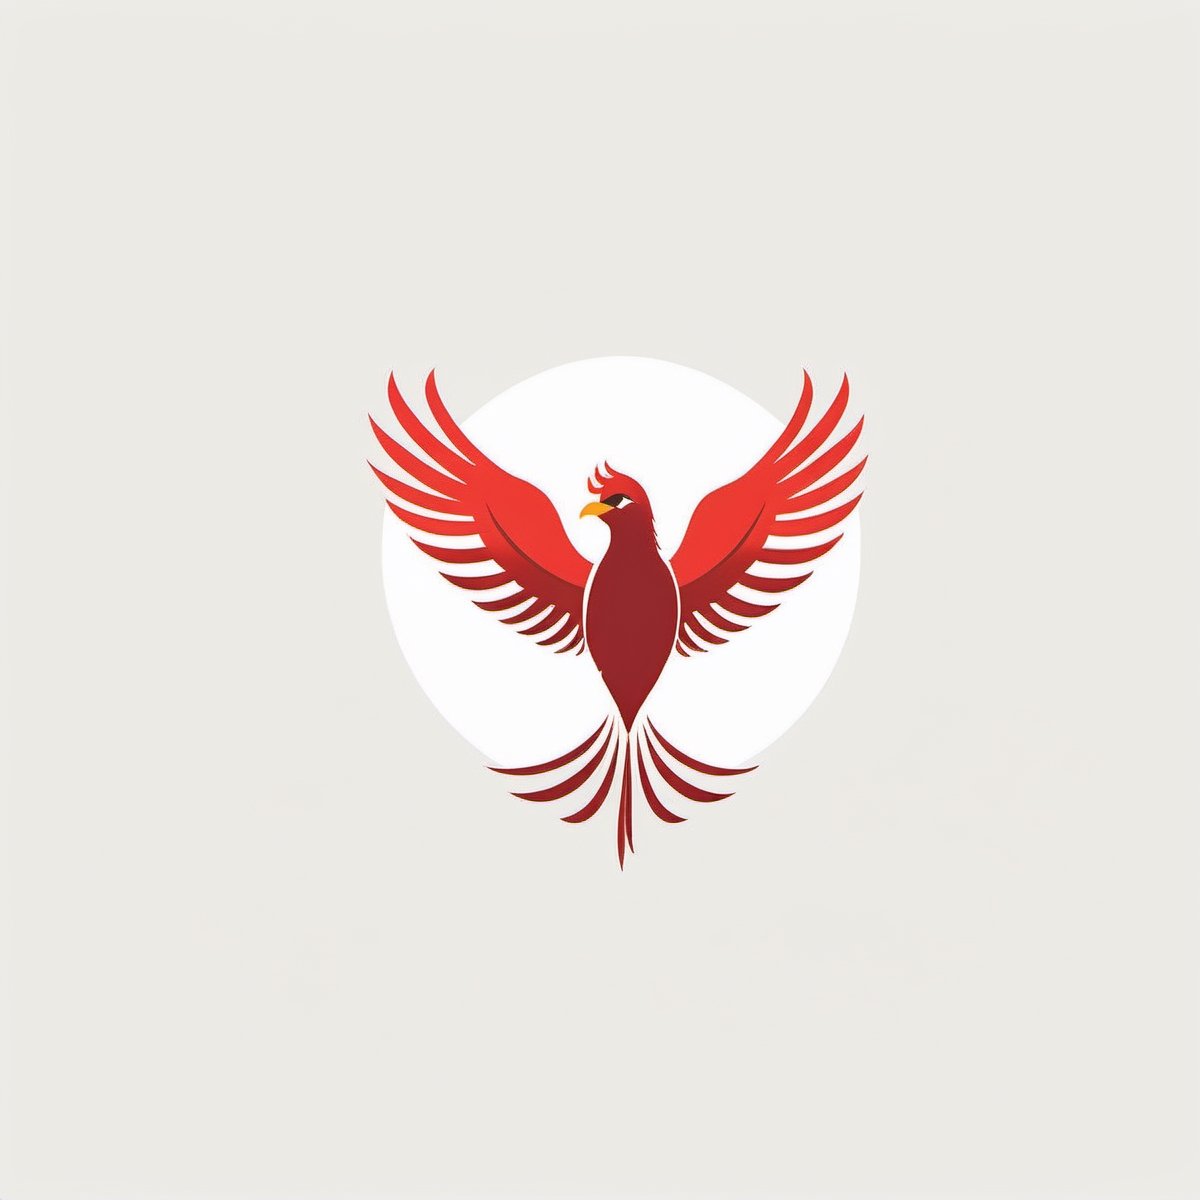 Create a sophisticated and minimalist 2D corporate logo for a prestigious training institution, focusing on a phoenix motif. The primary color should be a bold and empowering red, while the secondary color is a crisp and clean white. Emphasize a sense of professionalism and growth, aligning with the institution's commitment to excellence and transformative education.